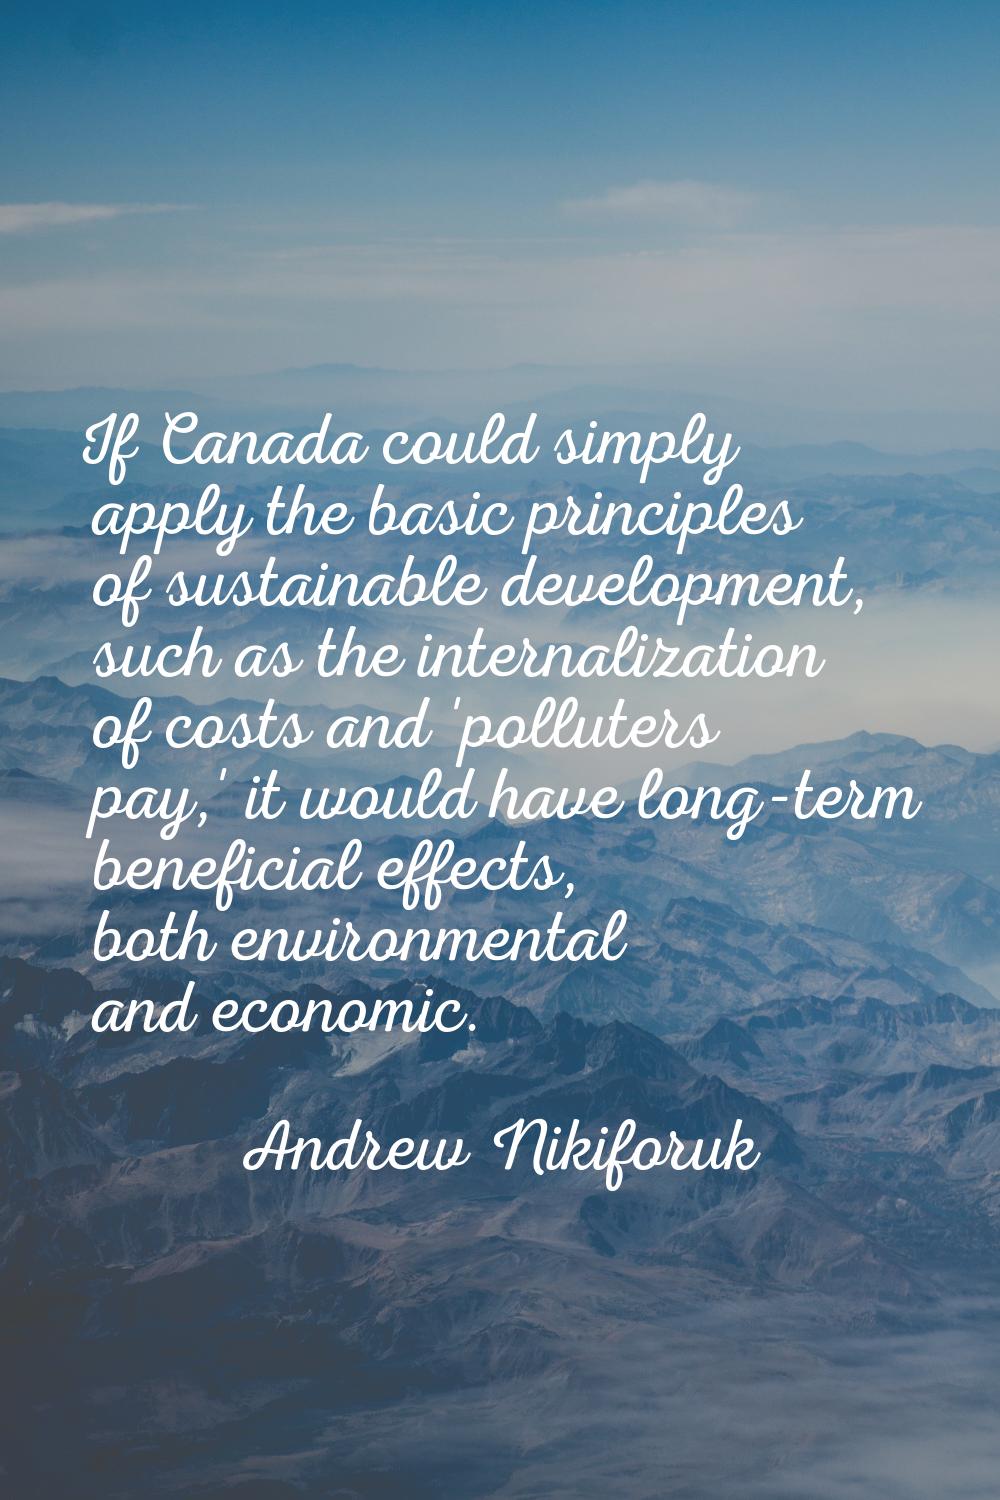 If Canada could simply apply the basic principles of sustainable development, such as the internali